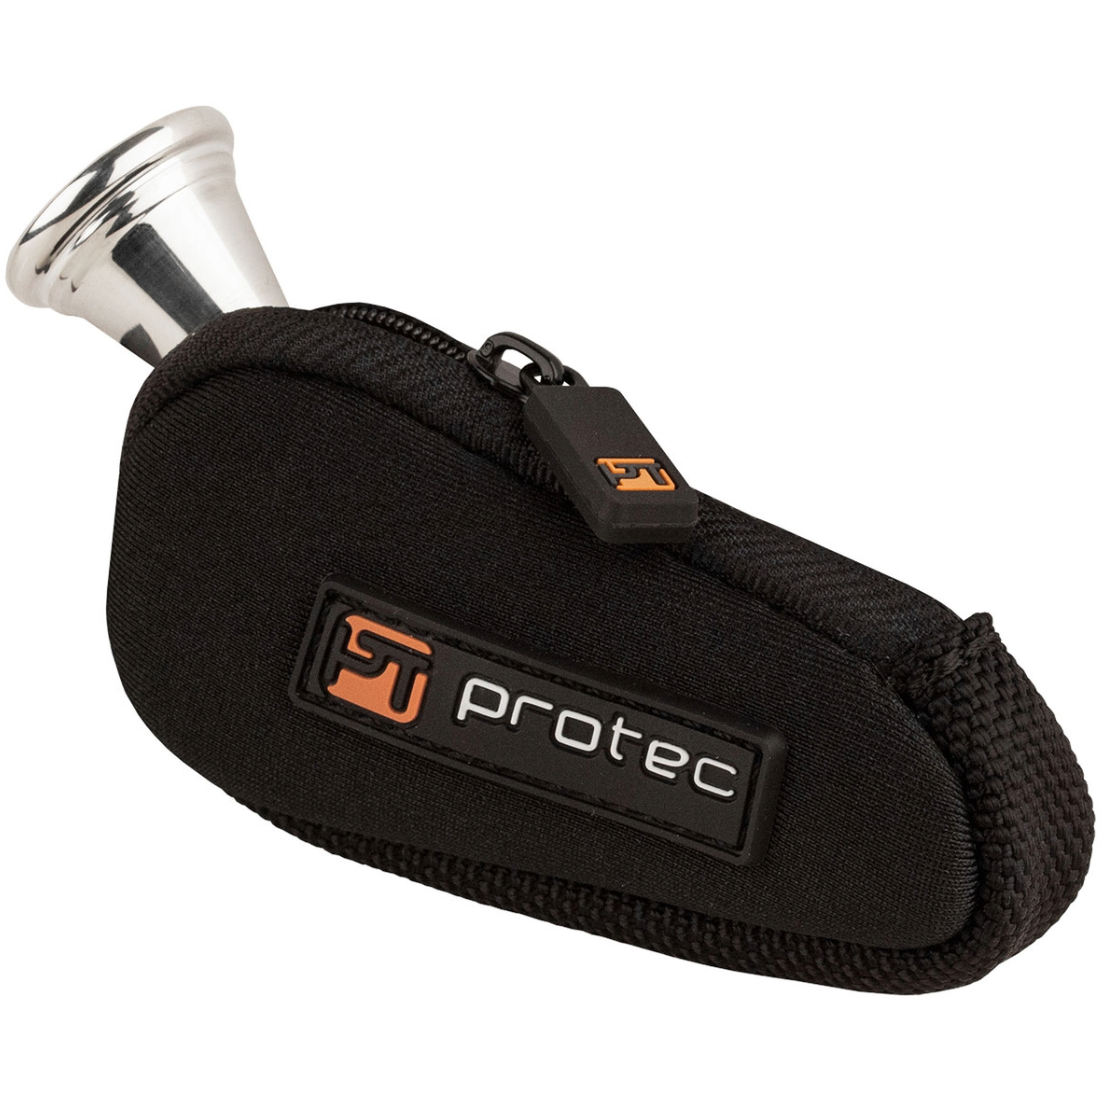 Black Pro Tec French horn mouthpiece pouch